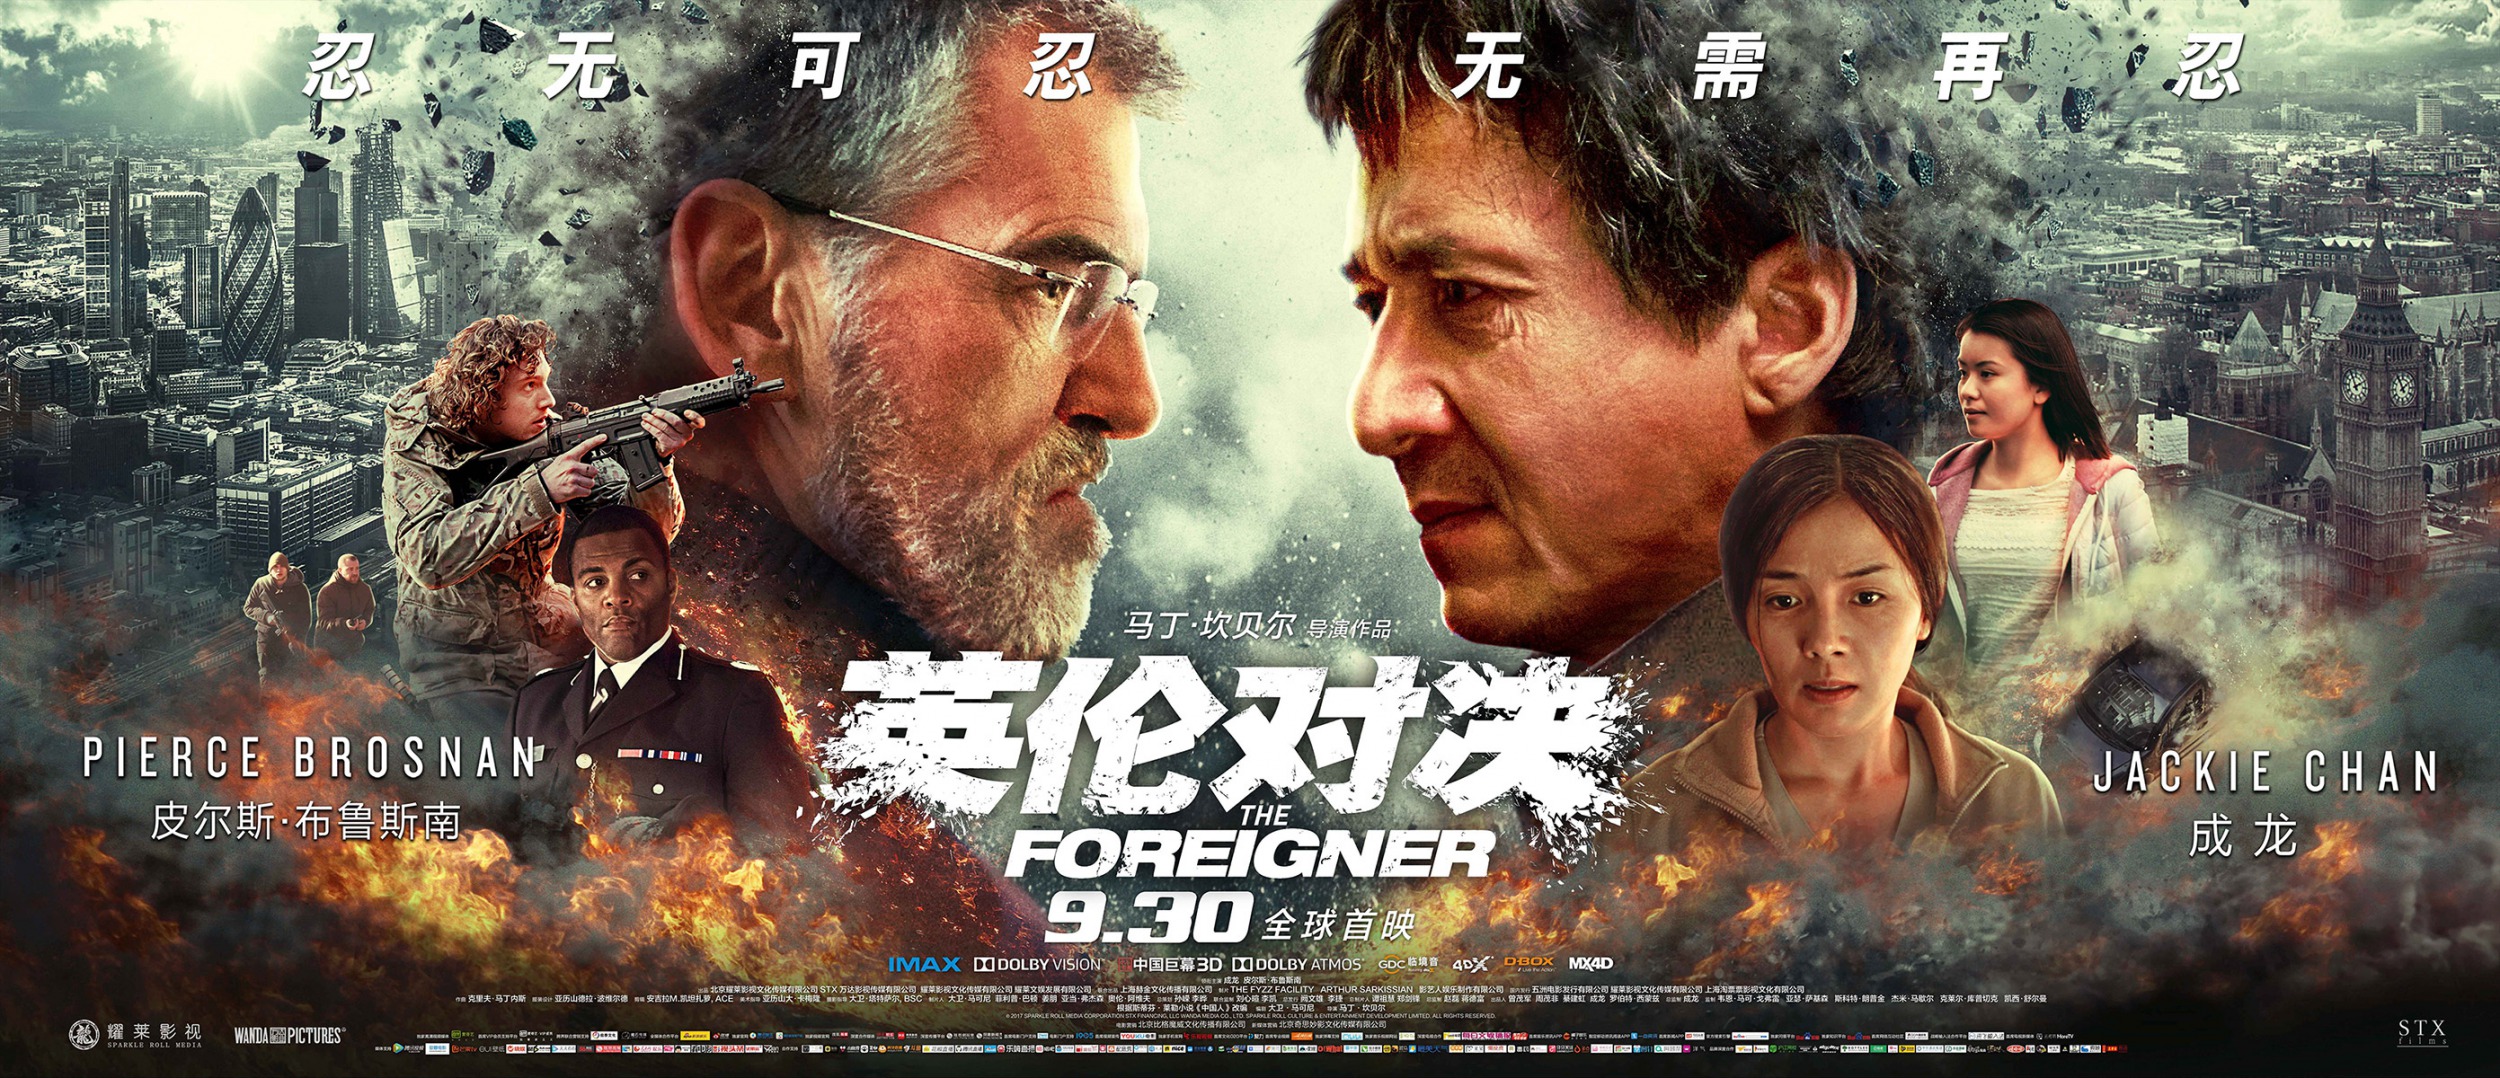 Mega Sized Movie Poster Image for The Foreigner (#12 of 14)